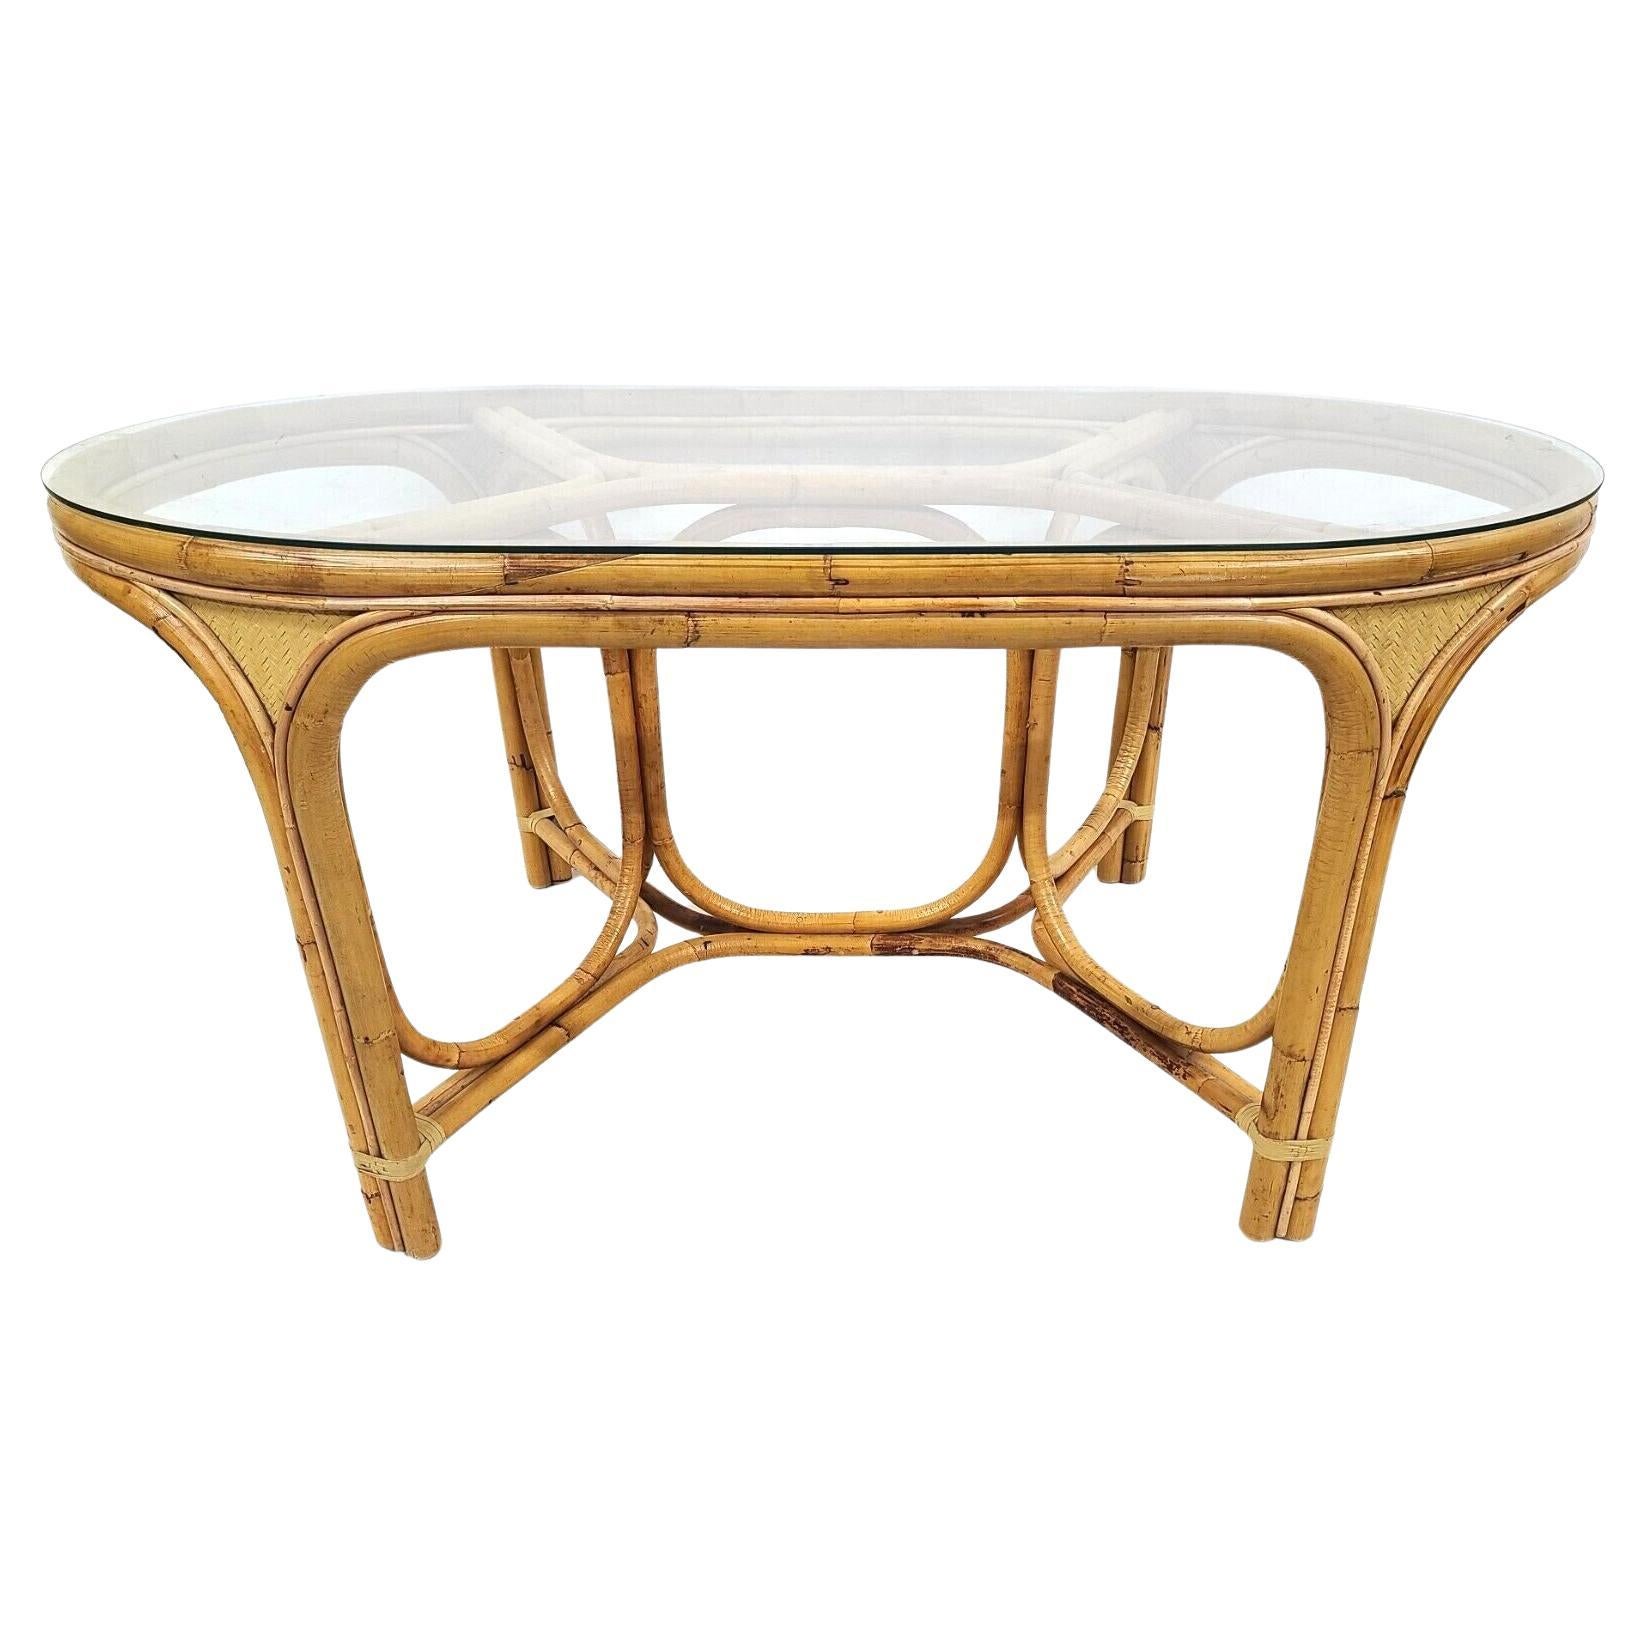 Vintage 1970s Bamboo Rattan Glass Oval Dining Table For Sale